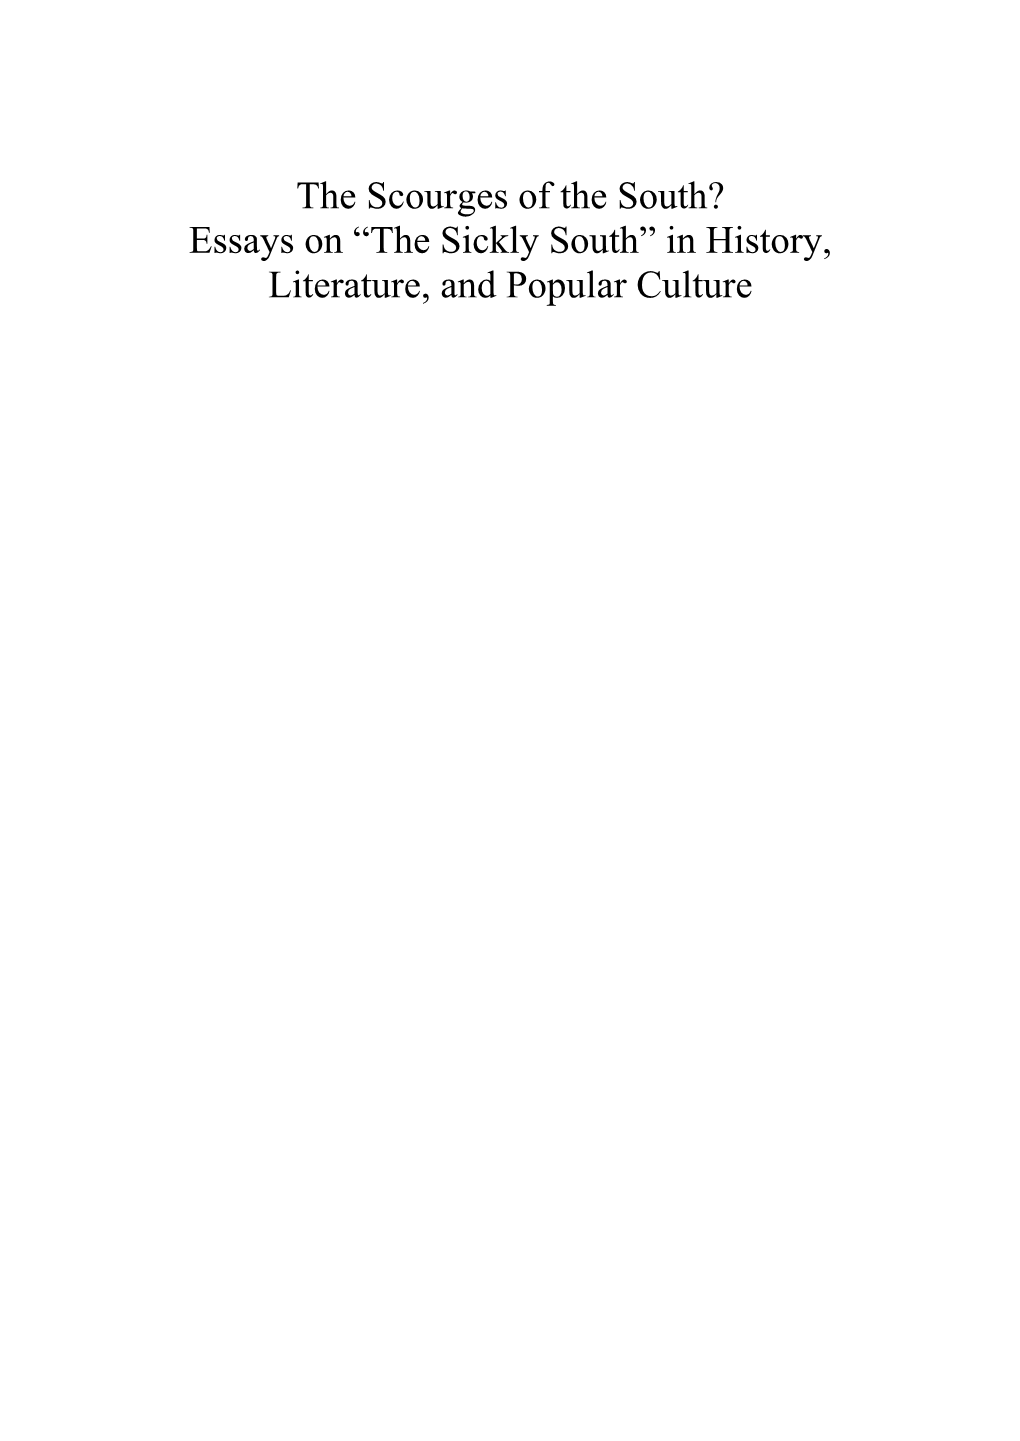 Essays on “The Sickly South” in History, Literature, and Popular Culture